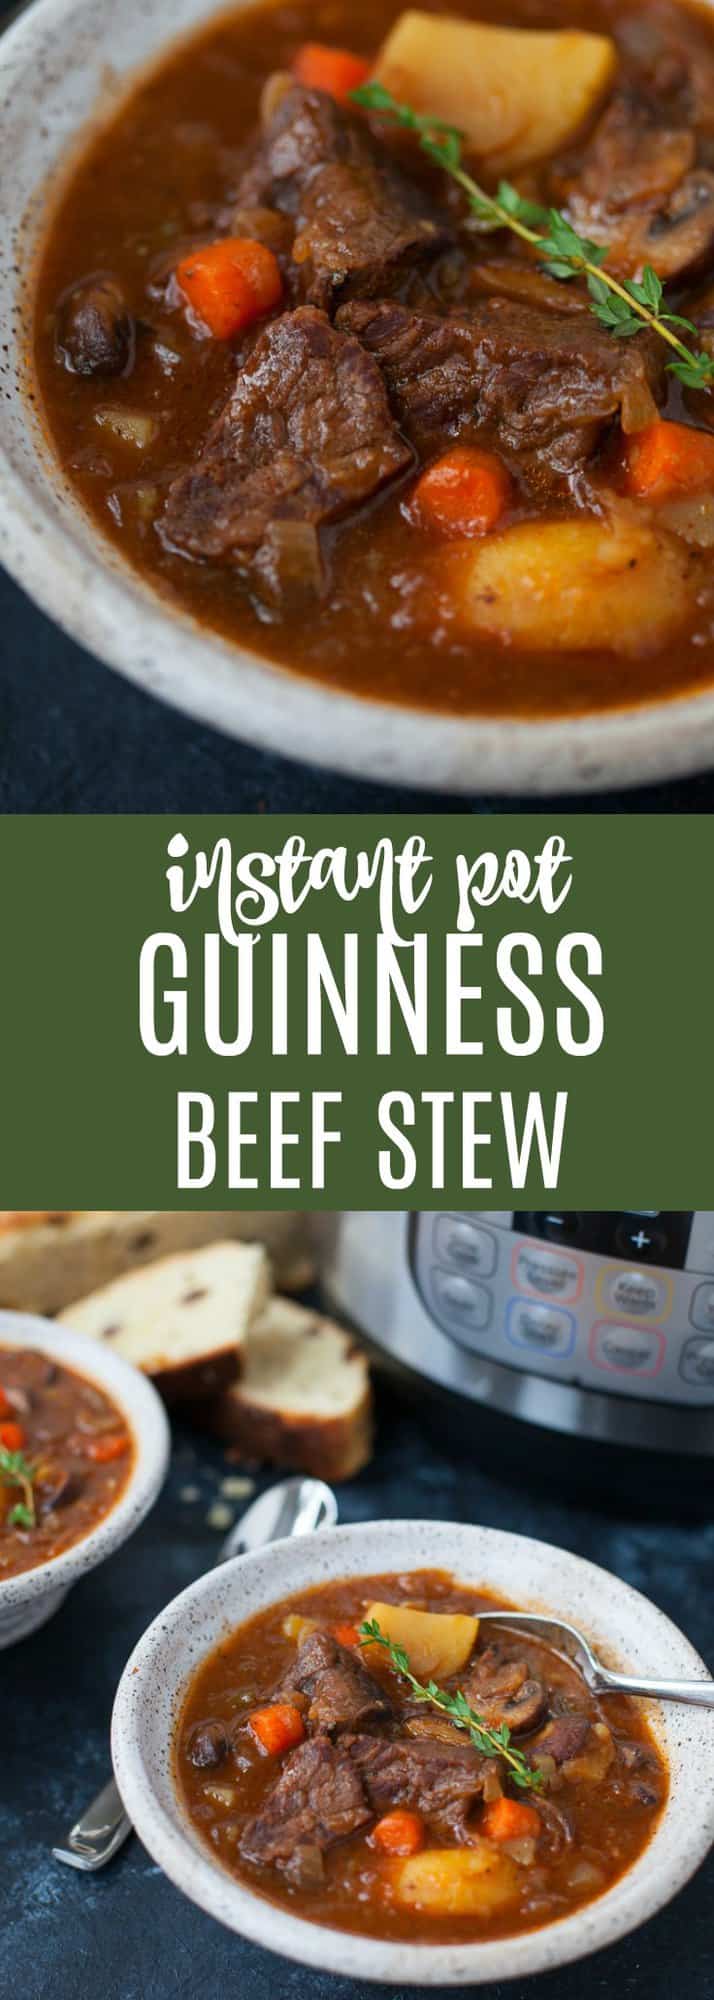 Super hearty and inherently Irish, this Instant Pot Guinness Beef Stew is the perfect recipe for a St. Patrick's Day feast.